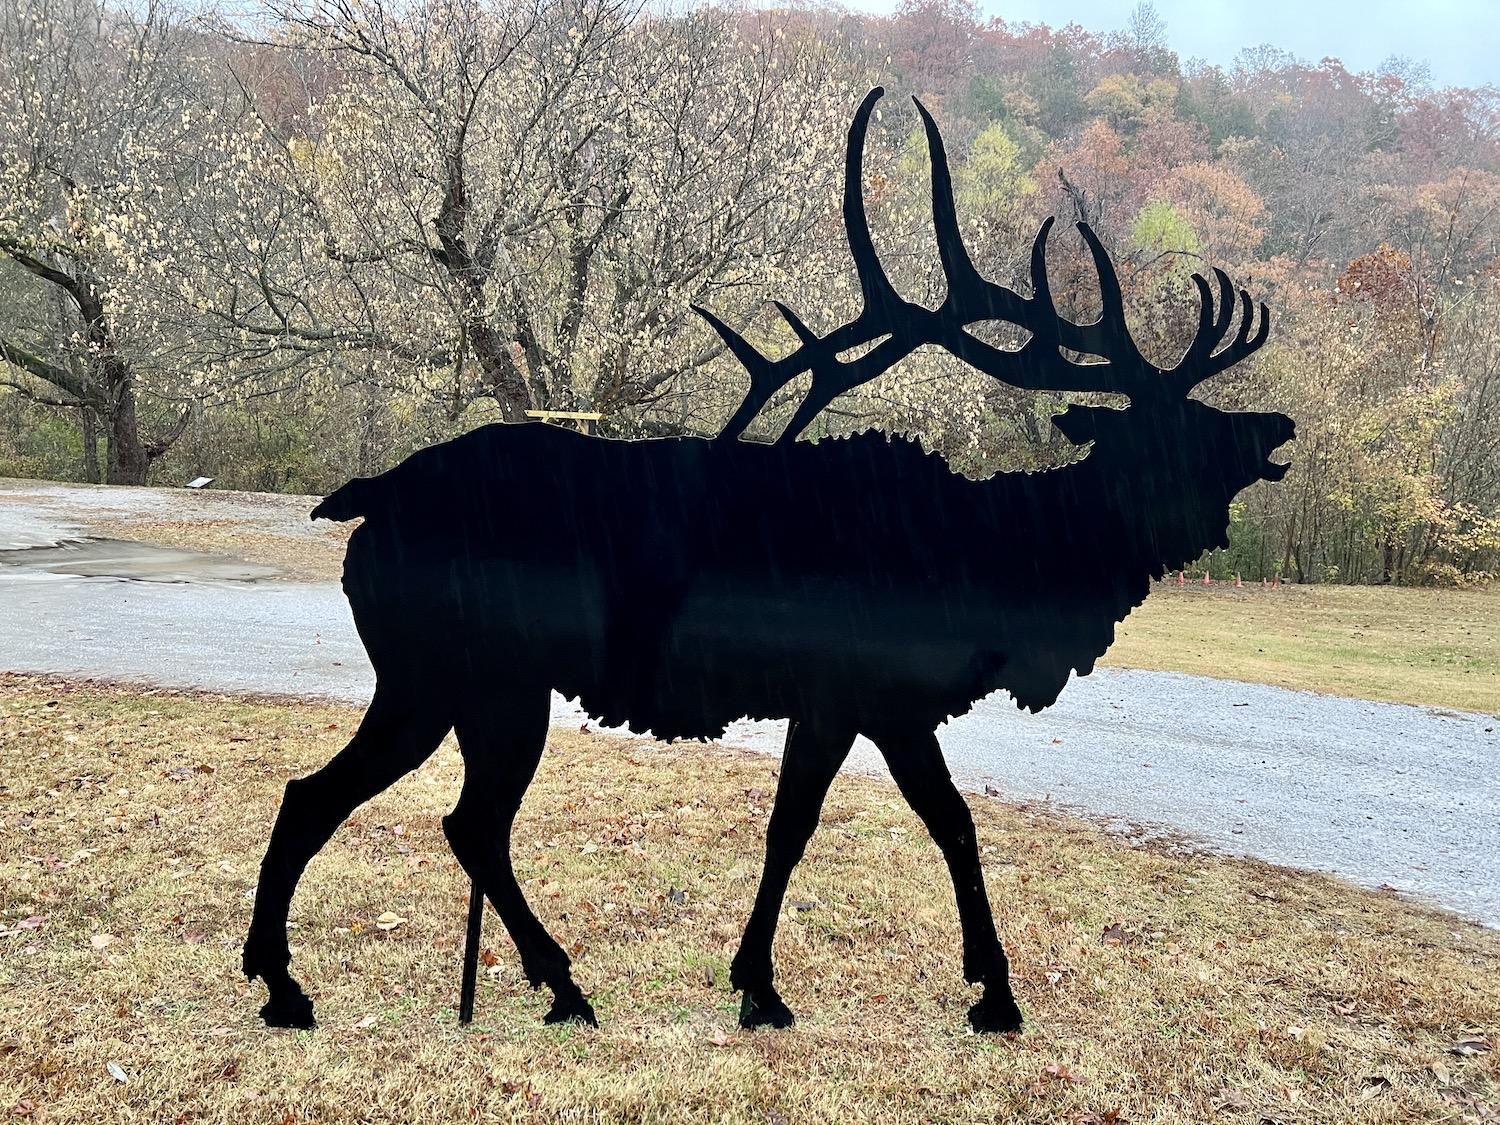 The only elk I spotted was at the Ponca Nature Center and made of steel.